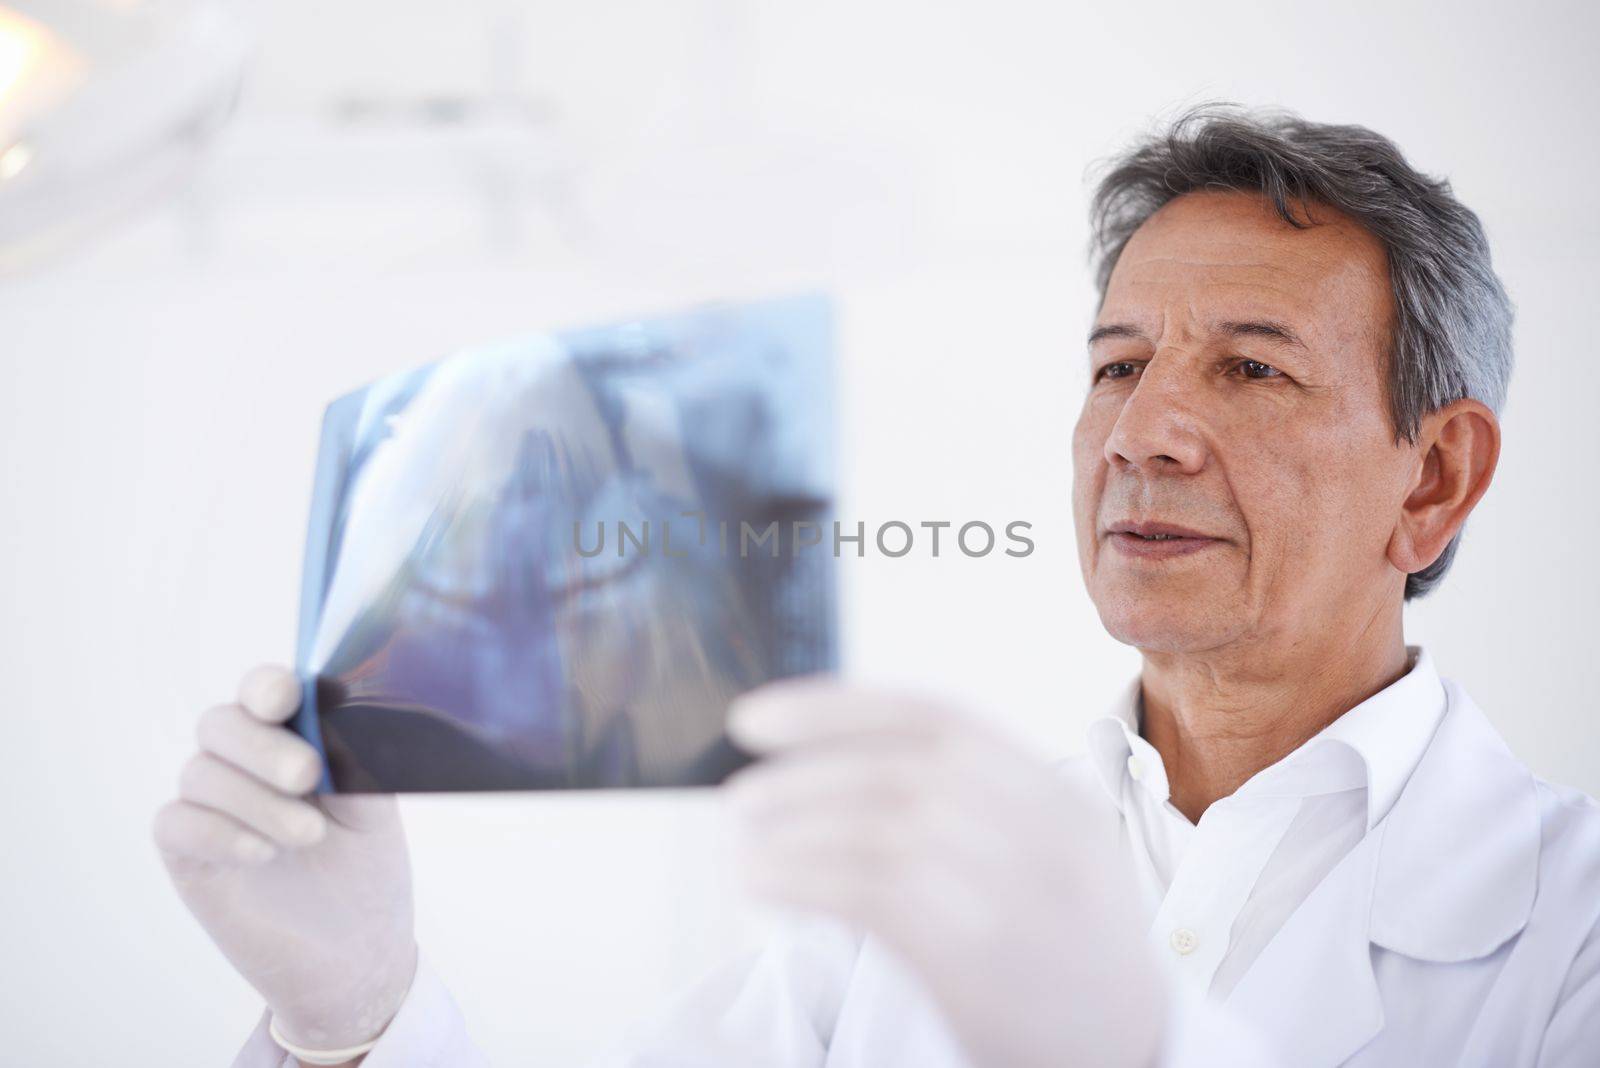 Getting a closer look. a dentist looking at an xray